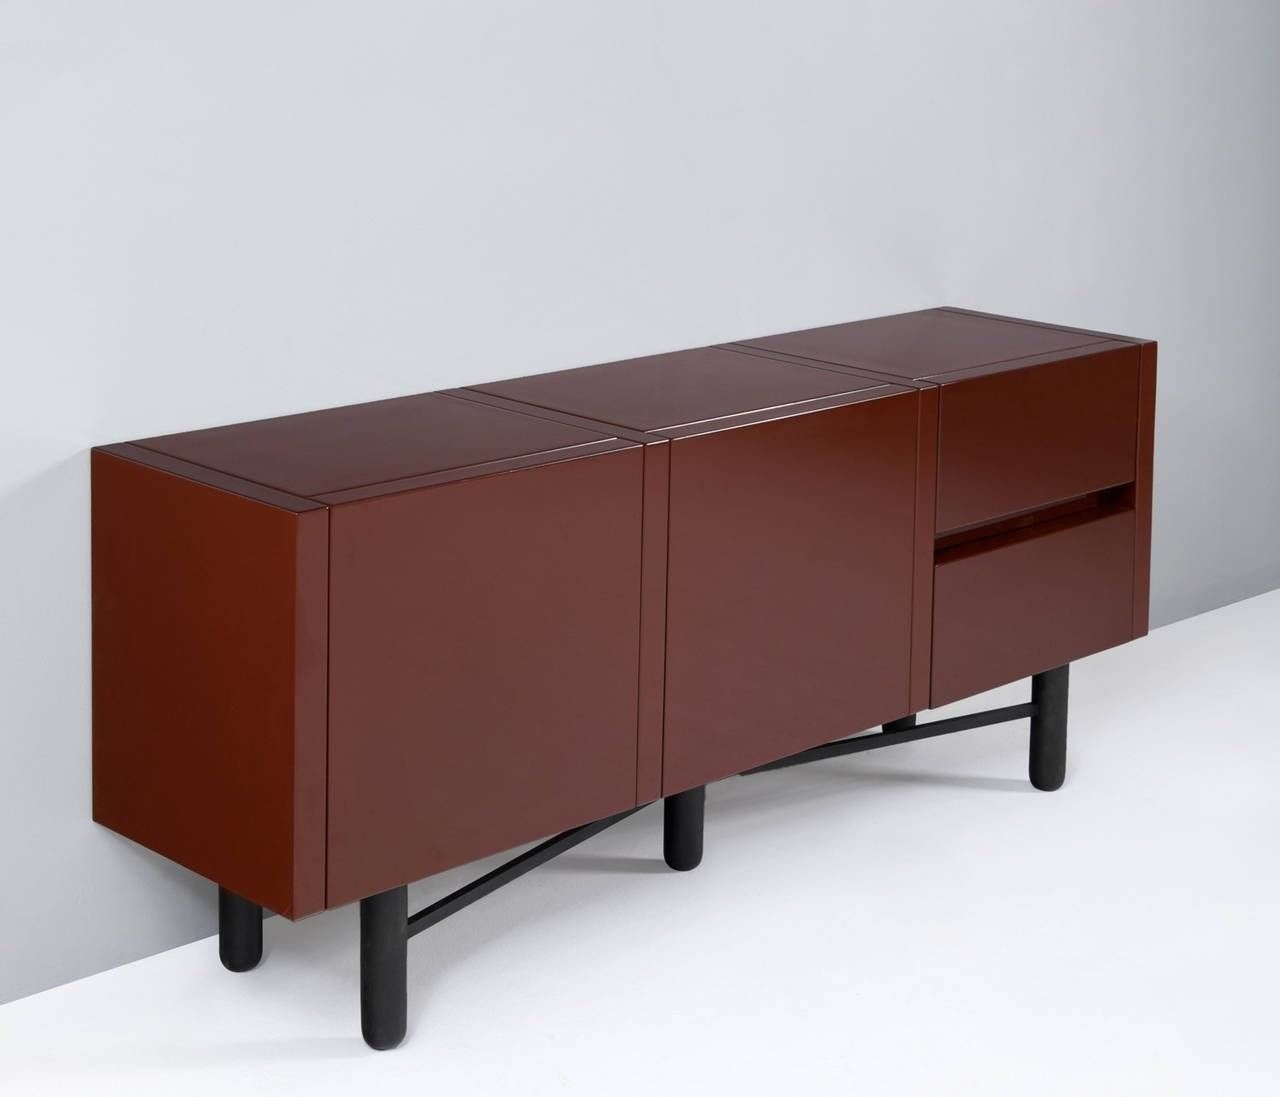 Roche Bobois Red Lacquered High Gloss Sideboard For Sale At 1stdibs Throughout High Gloss Black Sideboards (View 7 of 15)